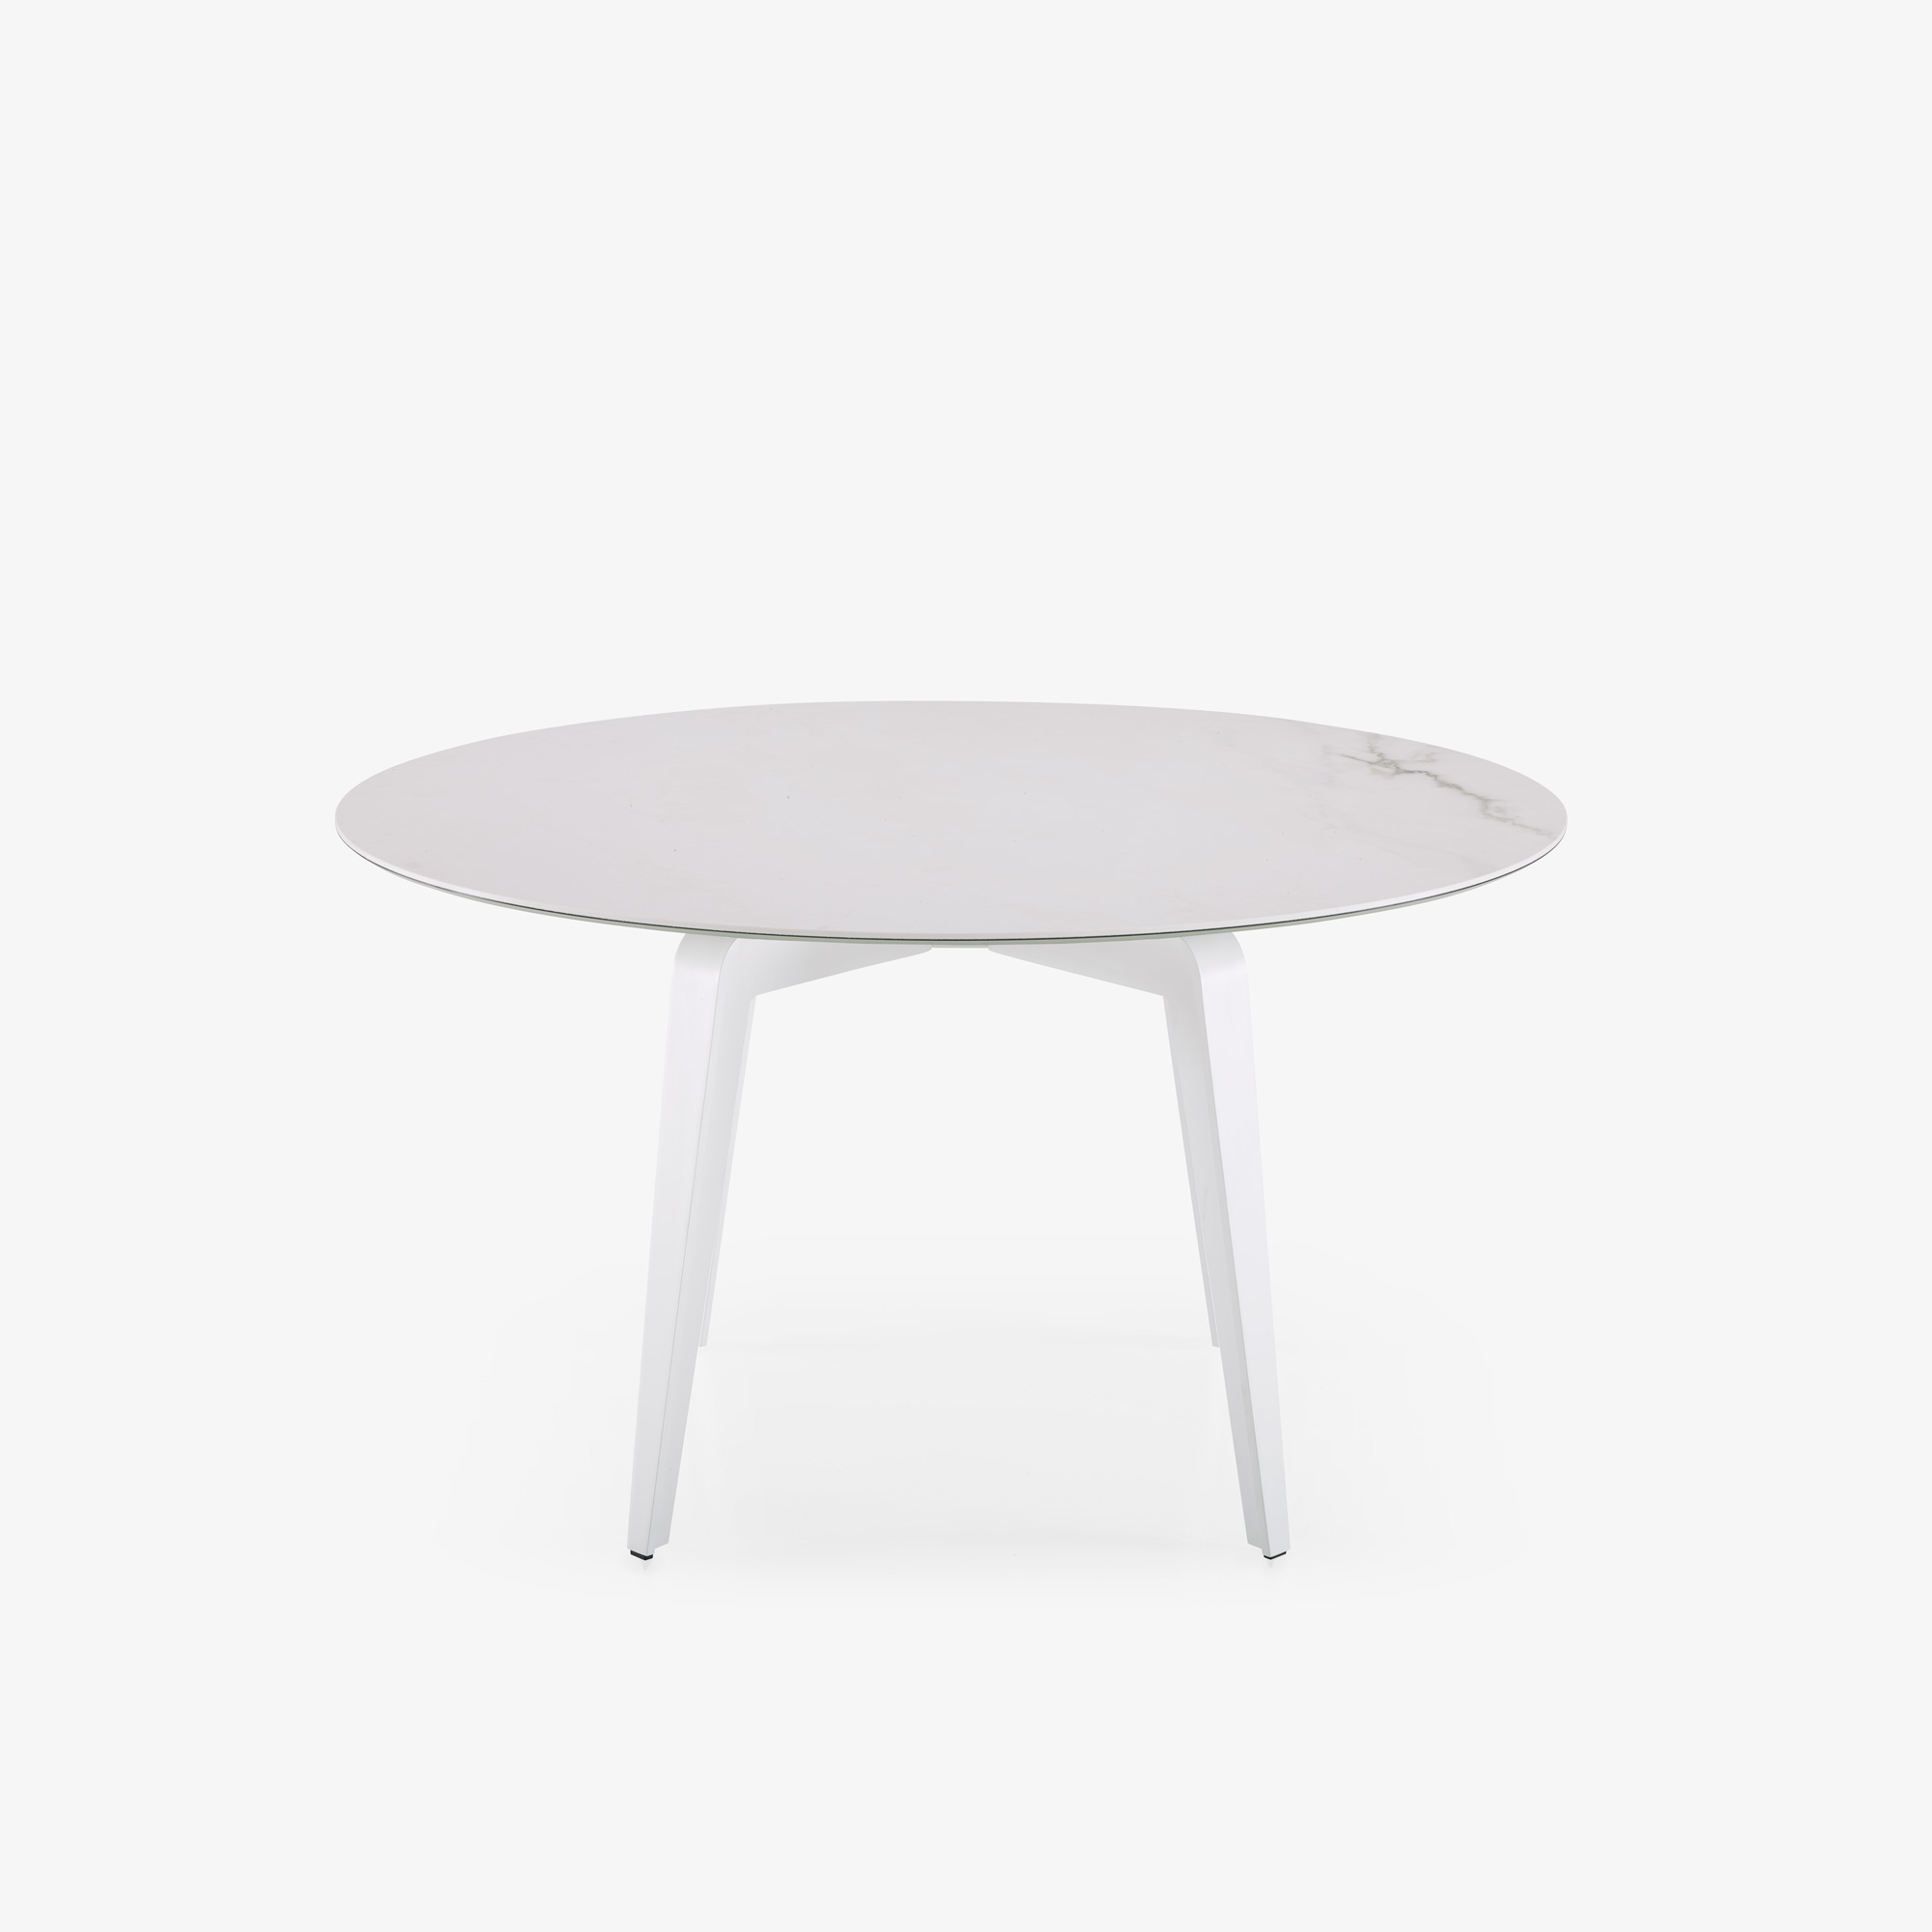 Image Round dining table white lacquered base  1